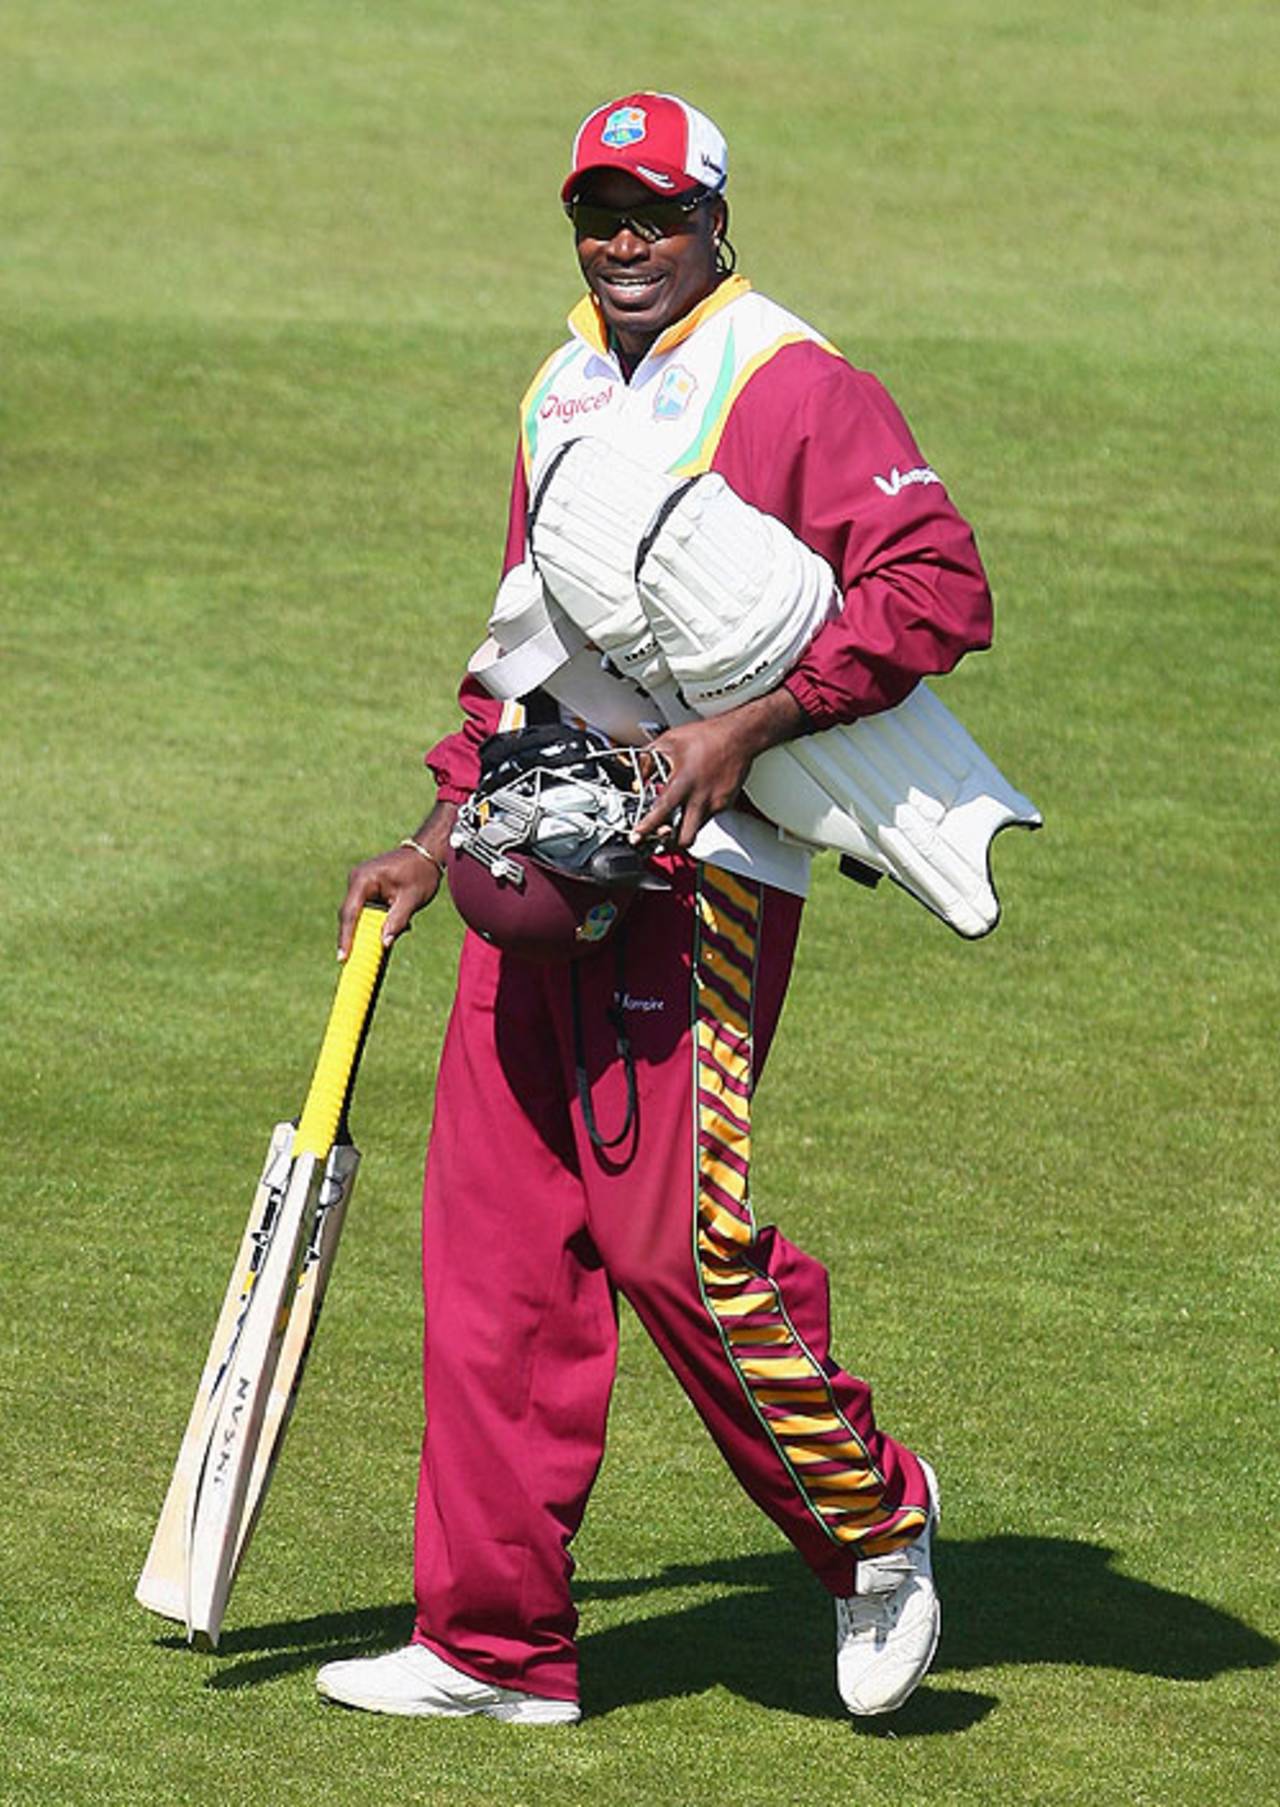 Chris Gayle is in a relaxed mood ahead of the second Test, despite his controversial comments, England v West Indies, 2nd Test, Durham, May 13, 2009